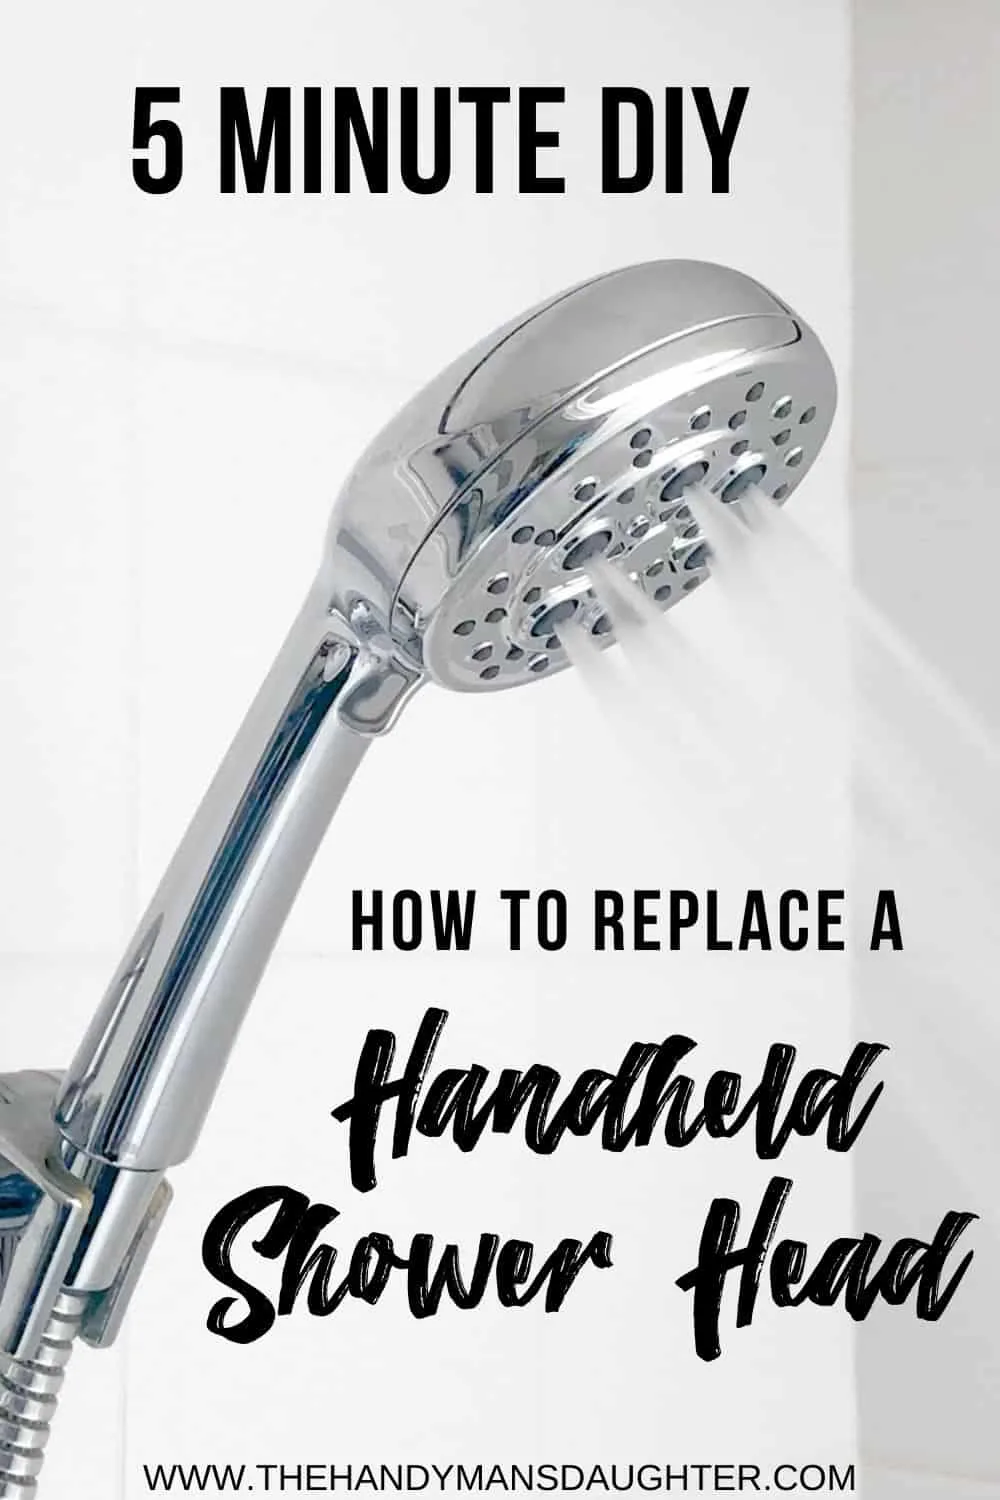 https://www.thehandymansdaughter.com/wp-content/uploads/2019/02/how-to-replace-a-handheld-shower-head-The-Handymans-Daughter-Pin.jpg.webp